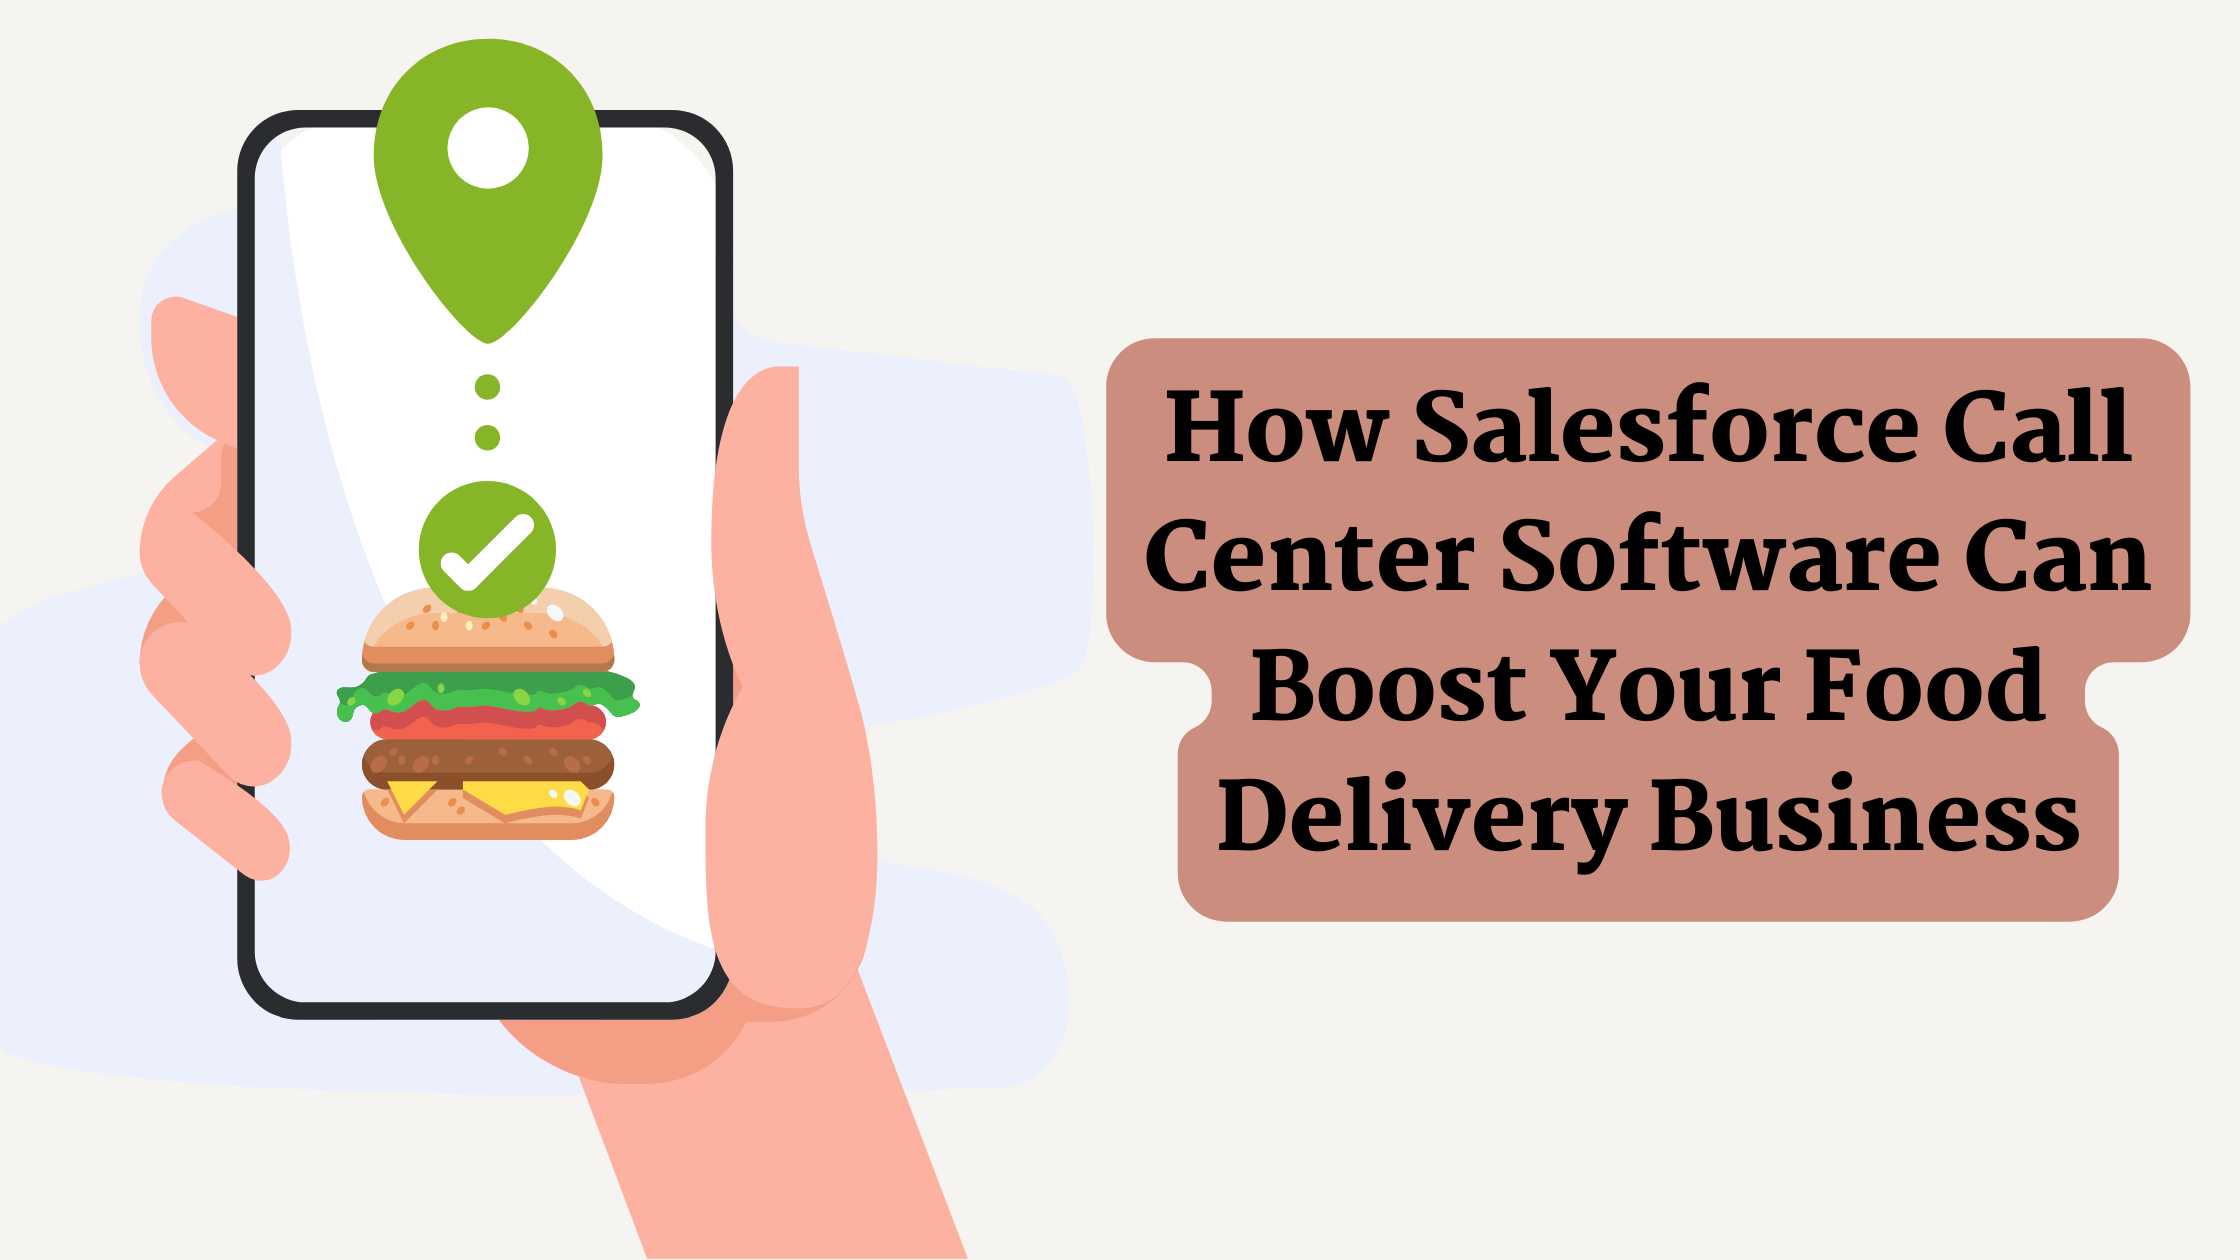 How Salesforce Call Center Software Can Boost Your Food Delivery Busines